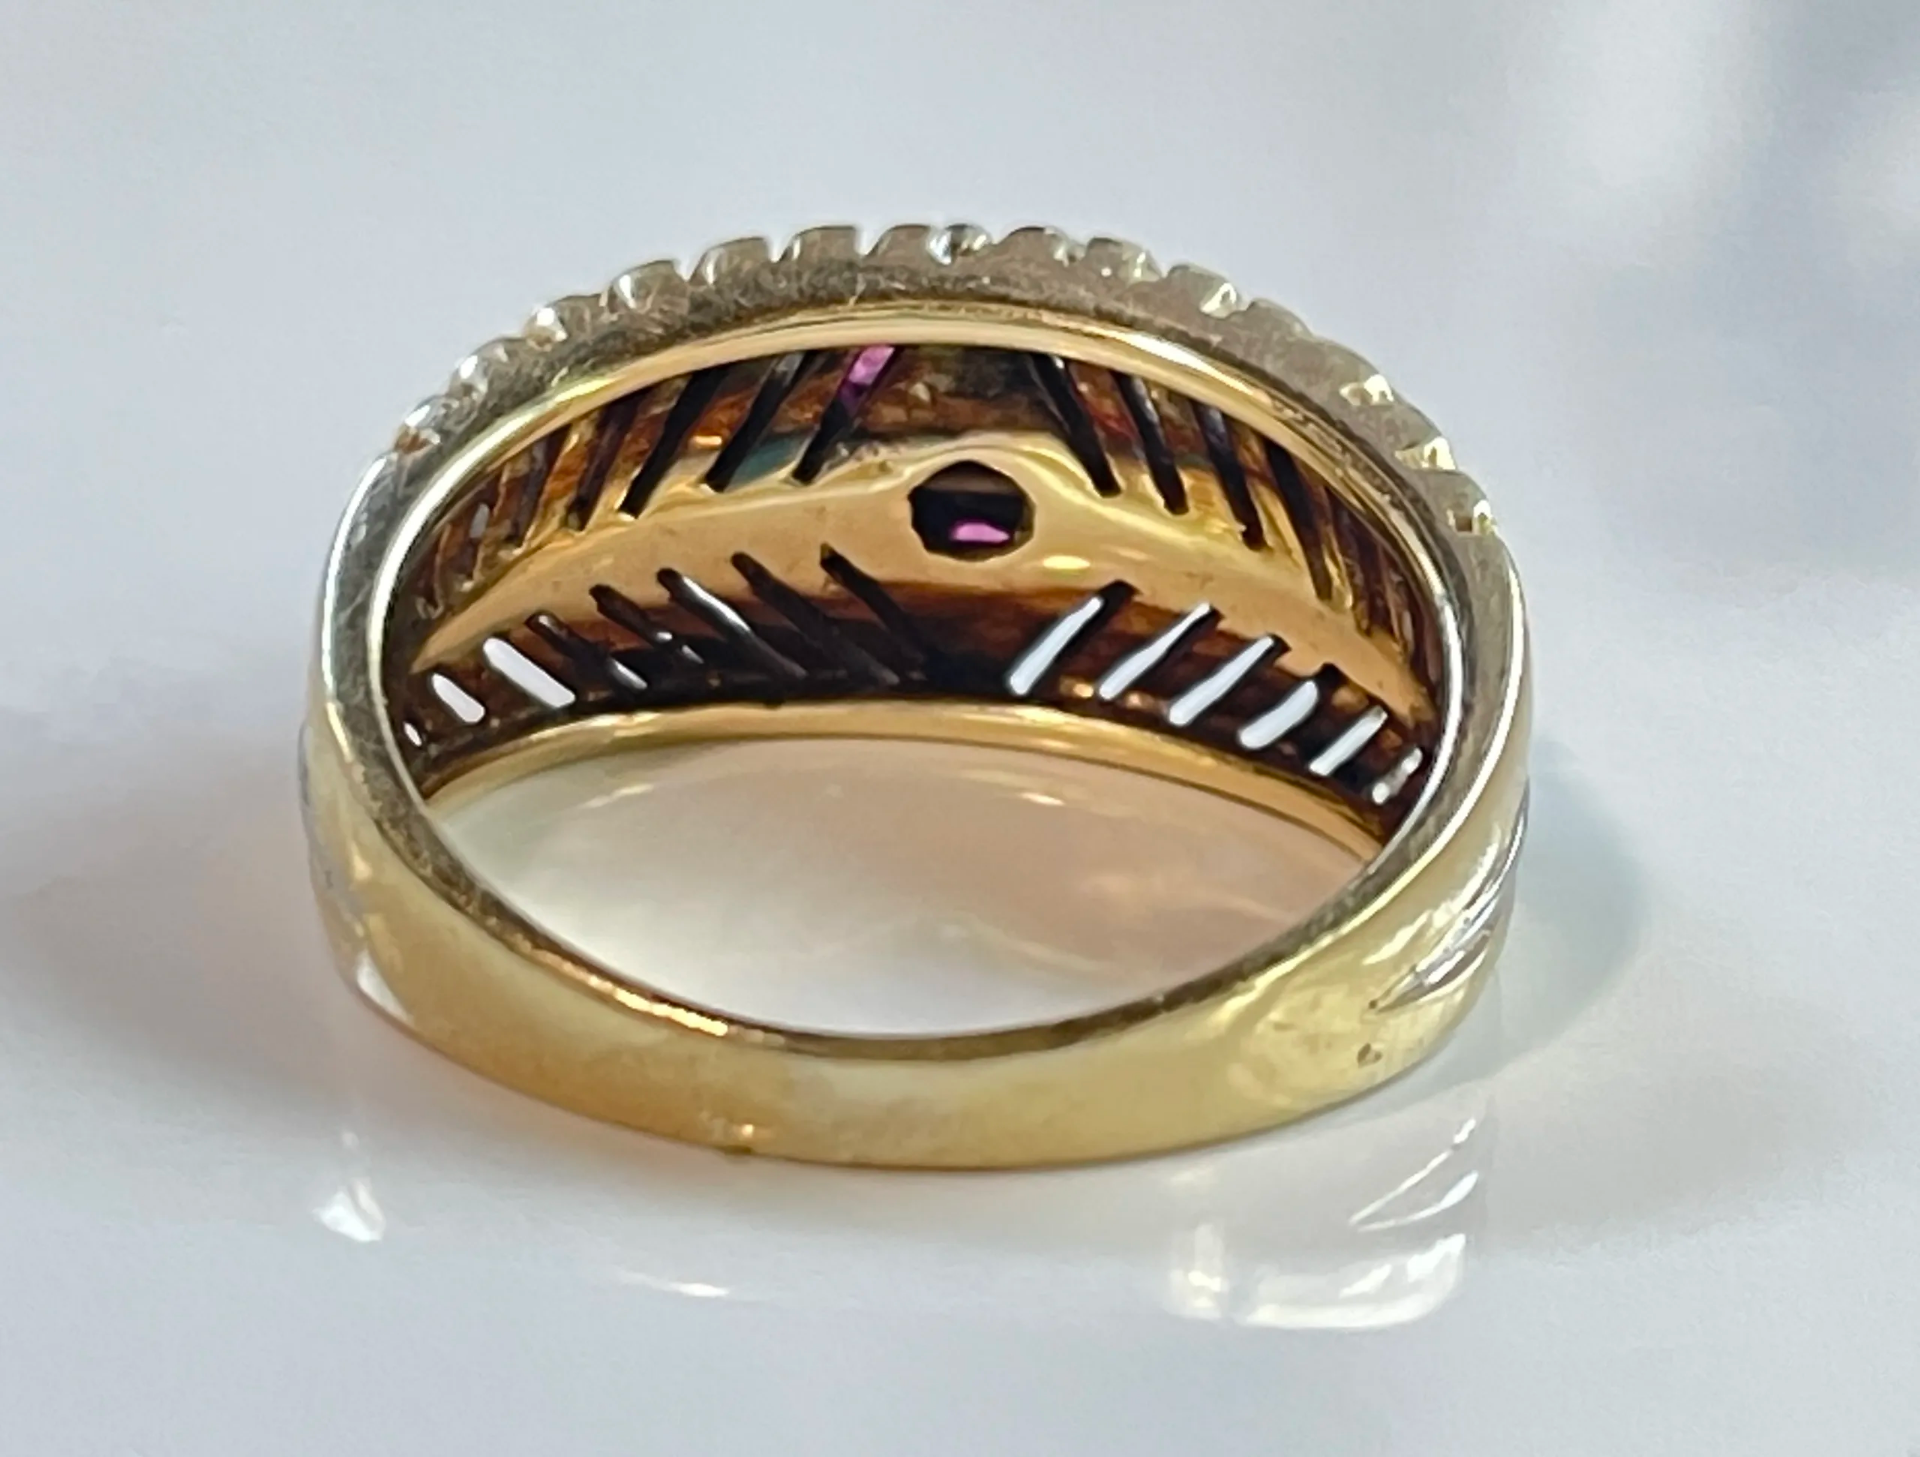 Vintage Rubies with Diamonds ring, 18ct. gold - Image 4 of 4